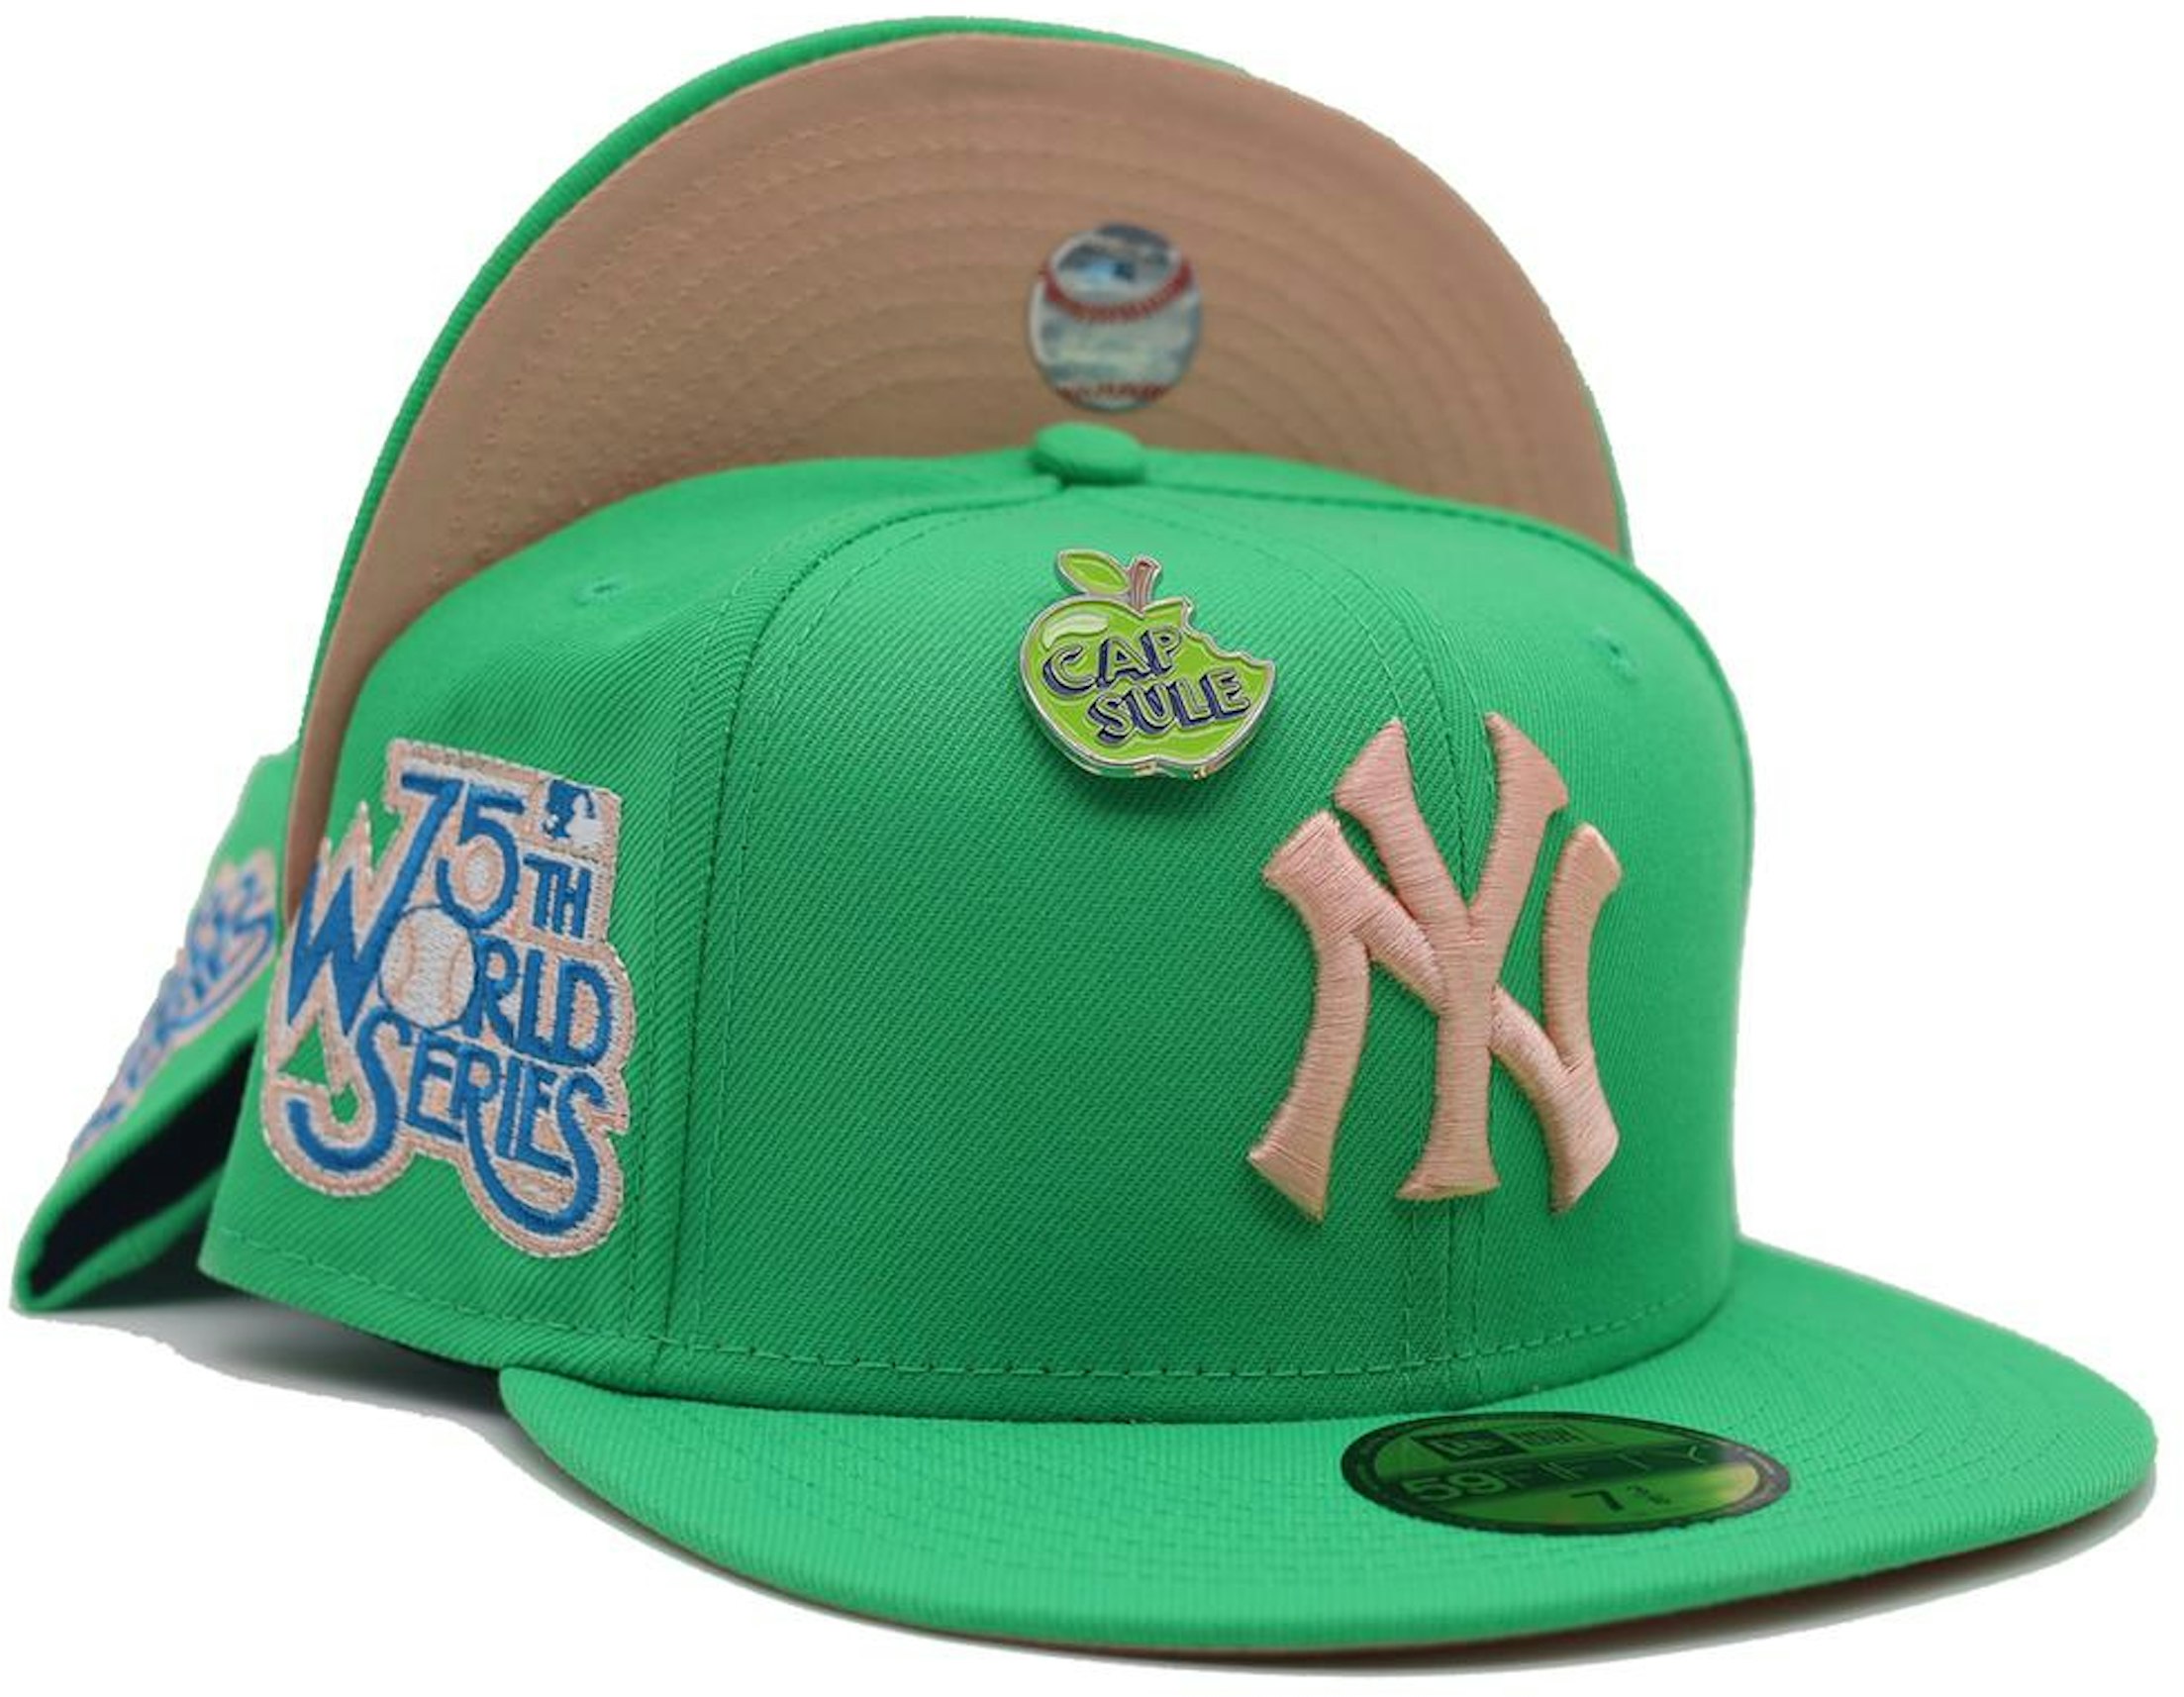 cowboy Lokken kiespijn New Era New York Yankees Capsule Apple Collection 75th World Series Capsule Hats  Exclusive 59Fifty Fitted Hat Green/Peach - FW21 Men's - US